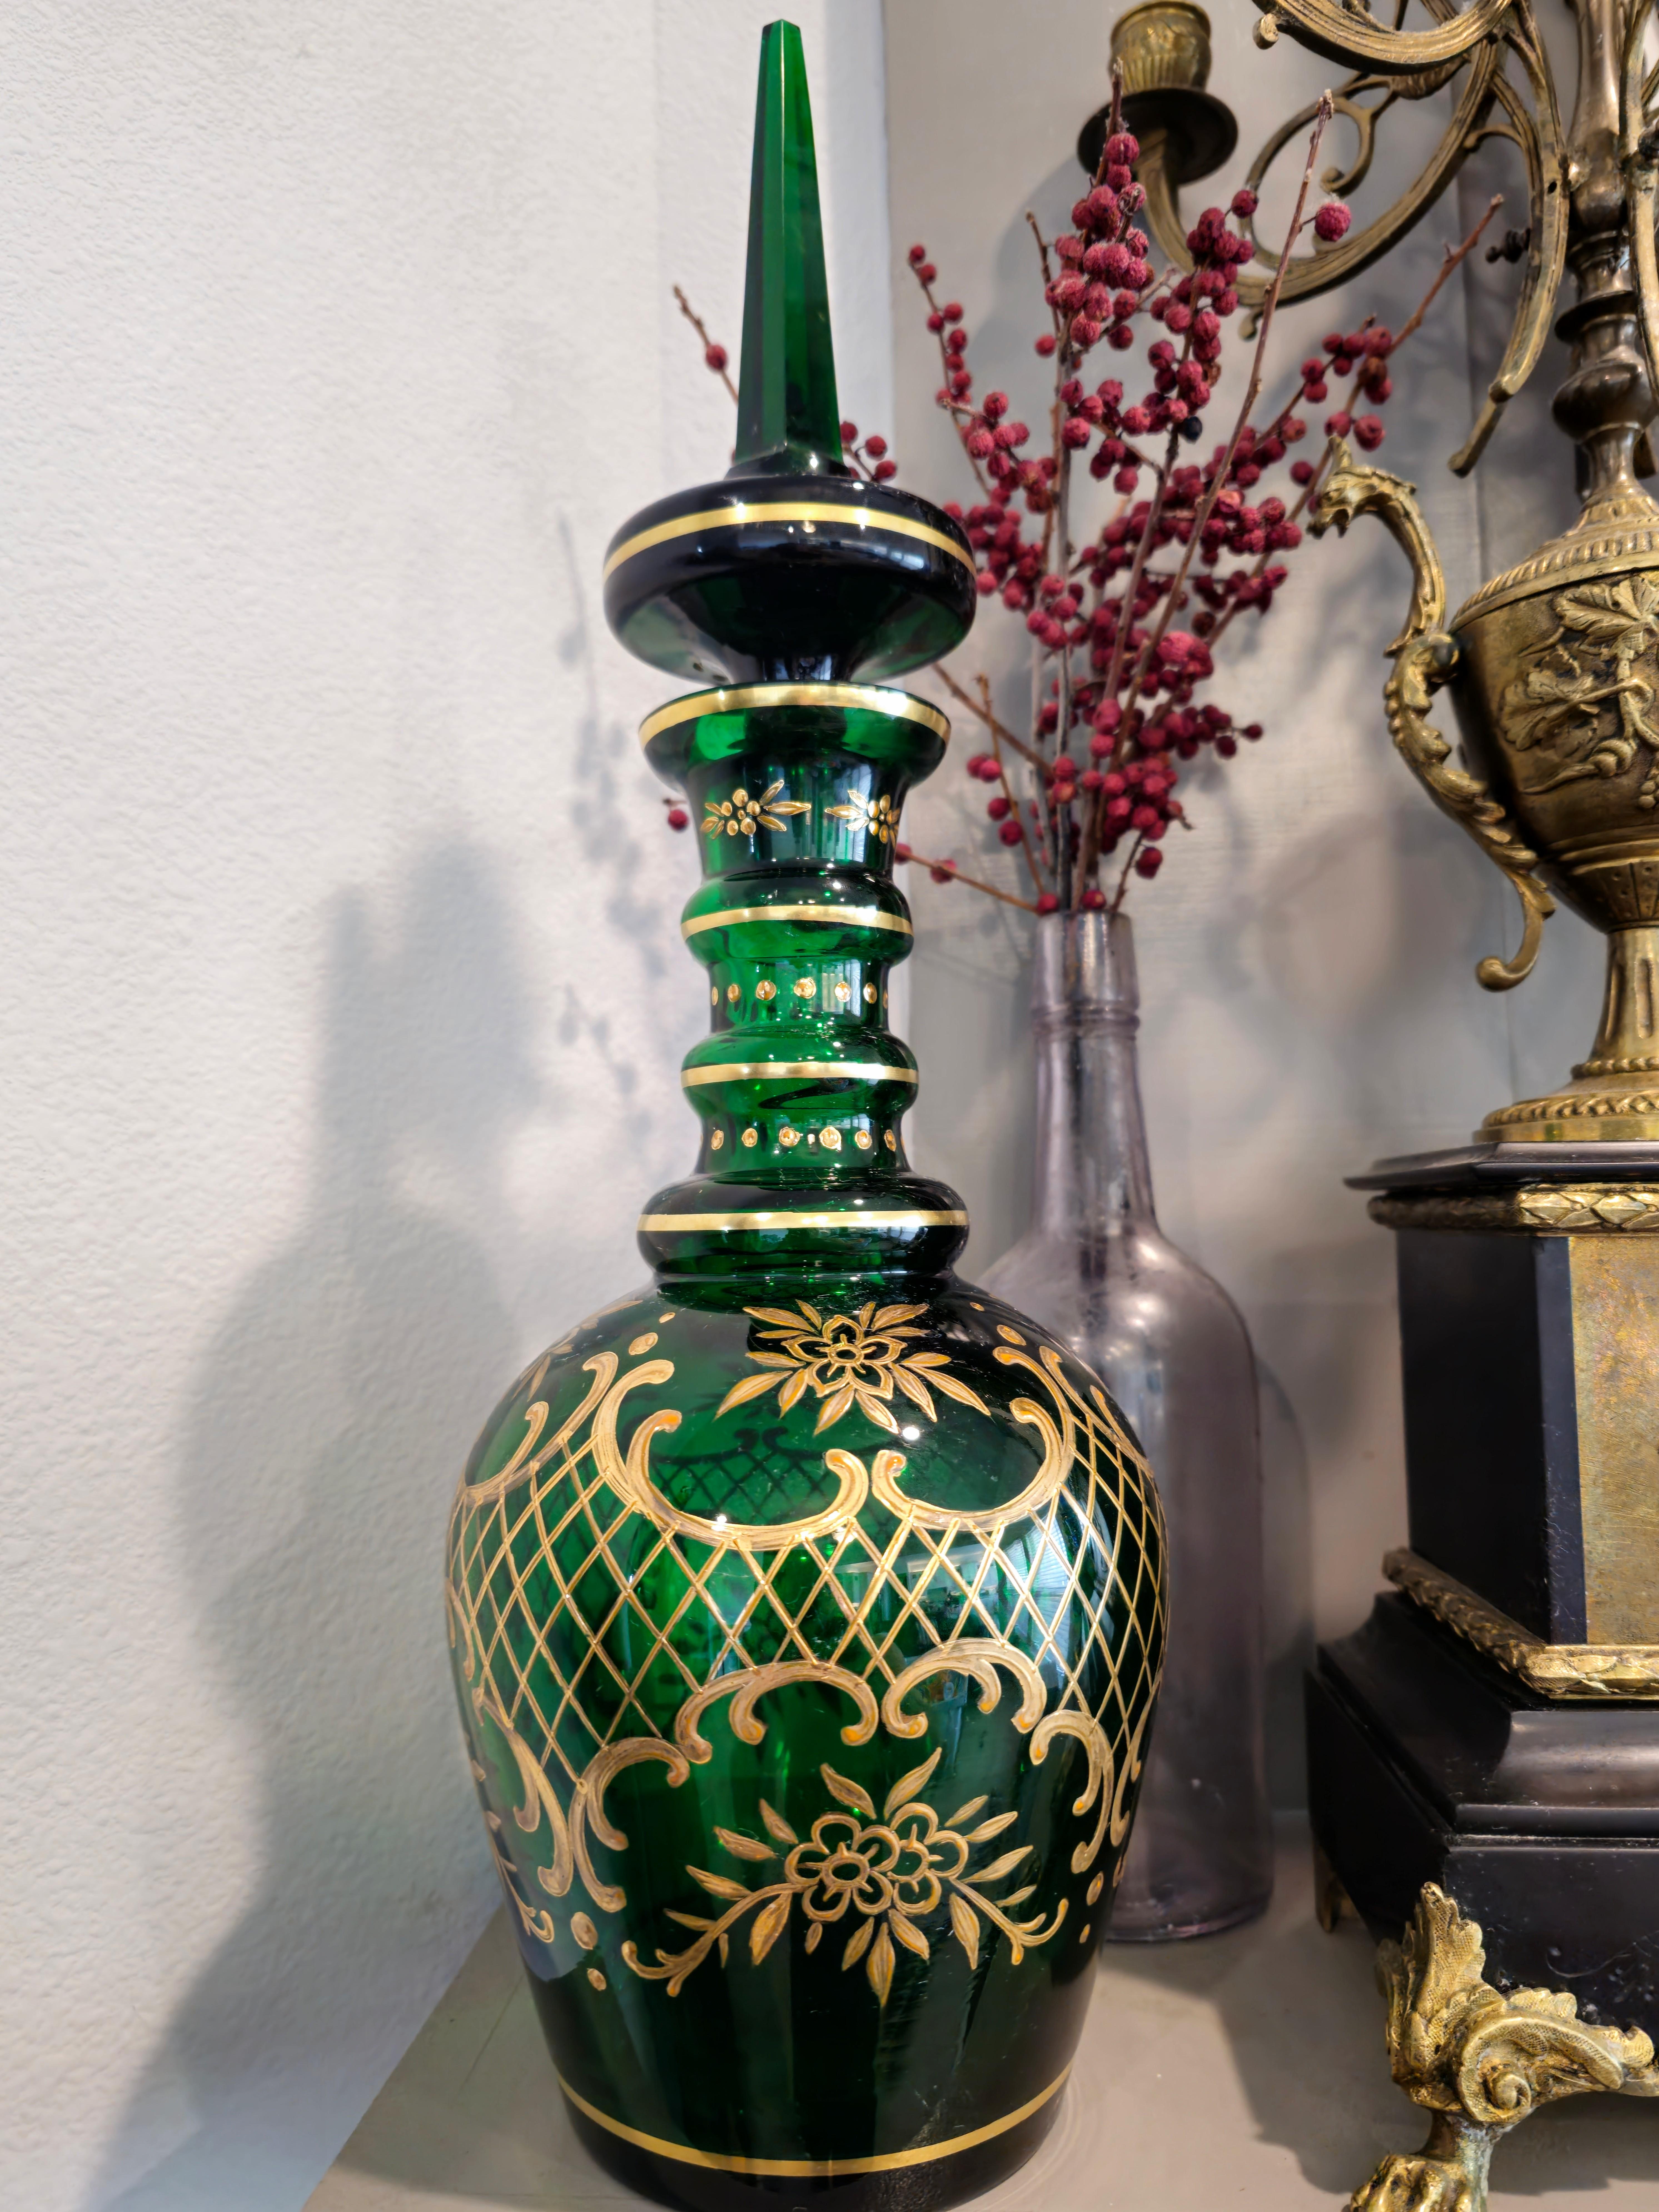 Add elegant warmth, sophistication, and deep rich color to any space with this stunning antique Moser Bohemian parcel gilt emerald green glass decanter. circa 1900

Born in Bohemia (present day Czech Republic) around the turn of the late 19th /